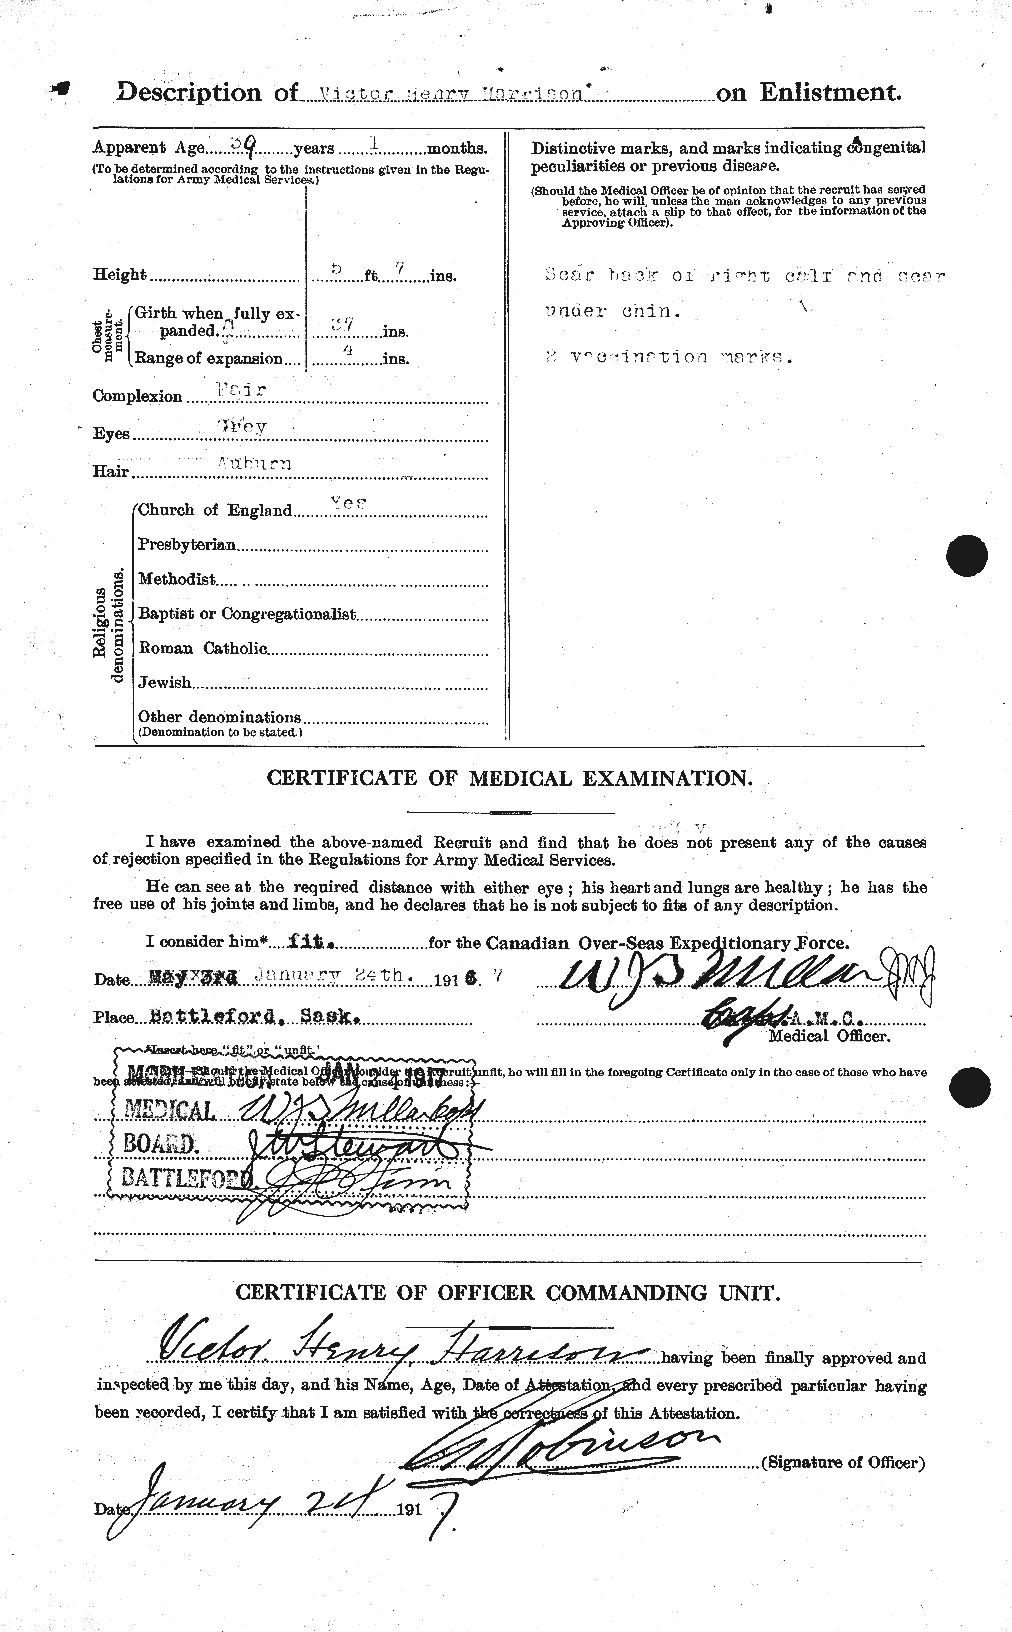 Personnel Records of the First World War - CEF 379919b